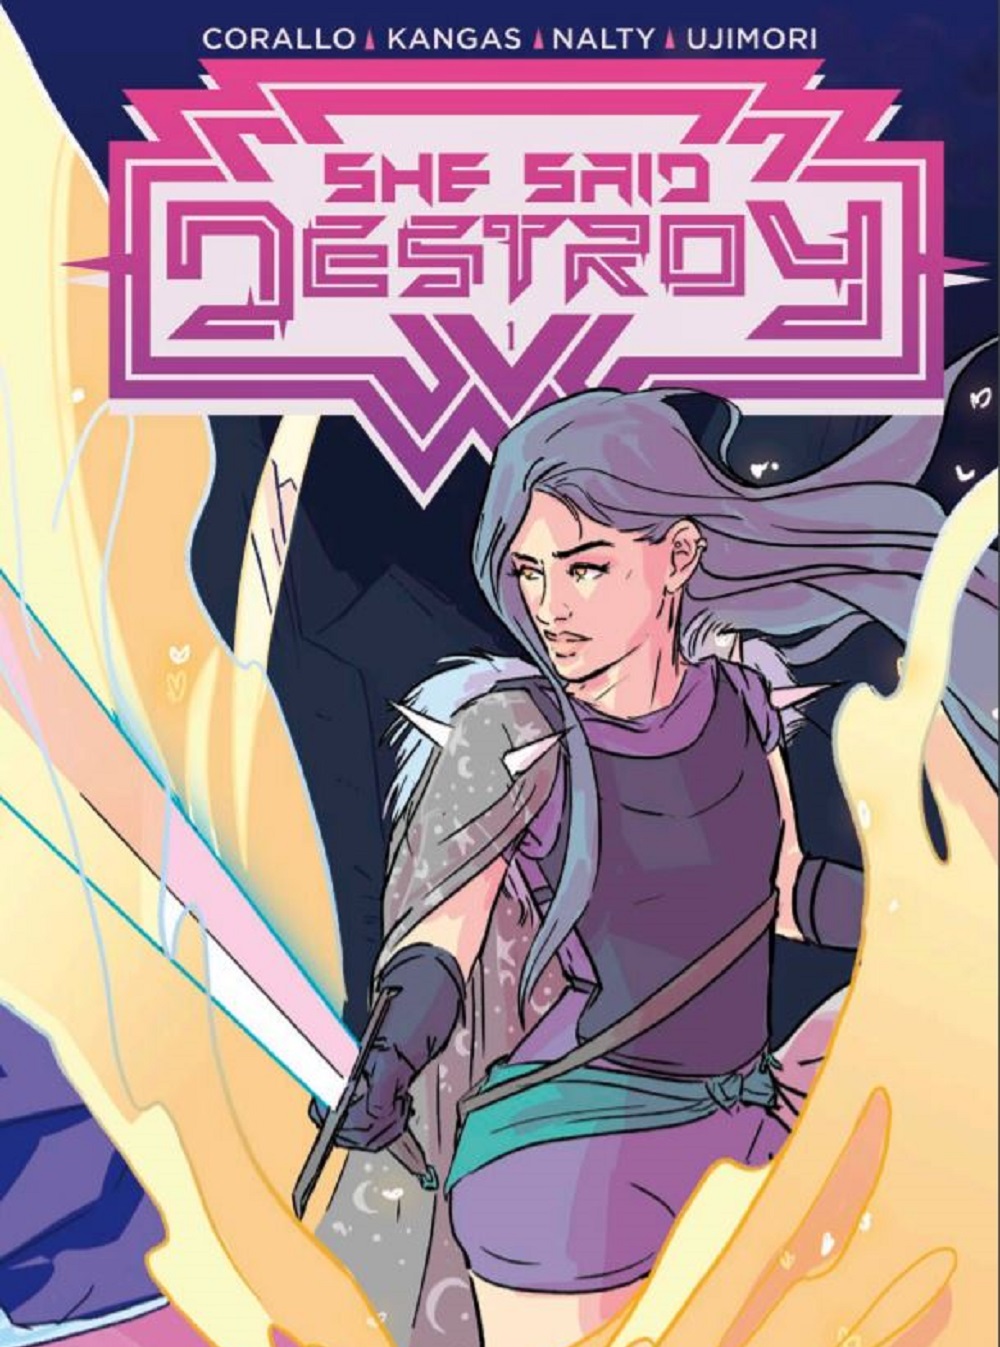 She Said Destroy #1 review: galactic crusade